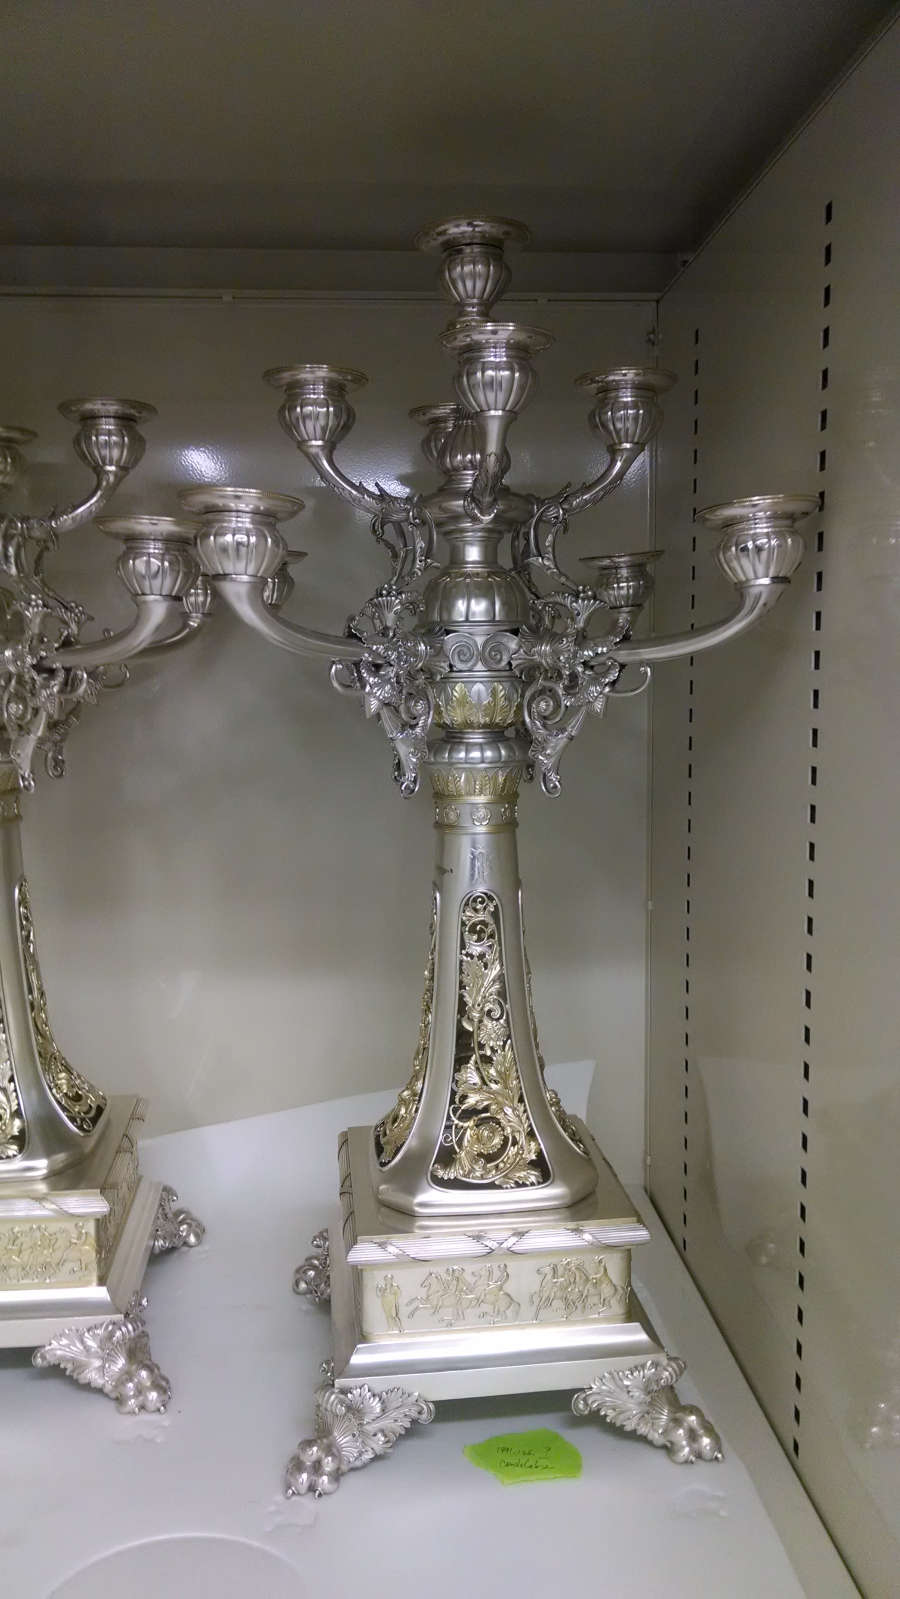 The back view of two of the same candle holders, placed in a storage shelf with white paper underneath them. 